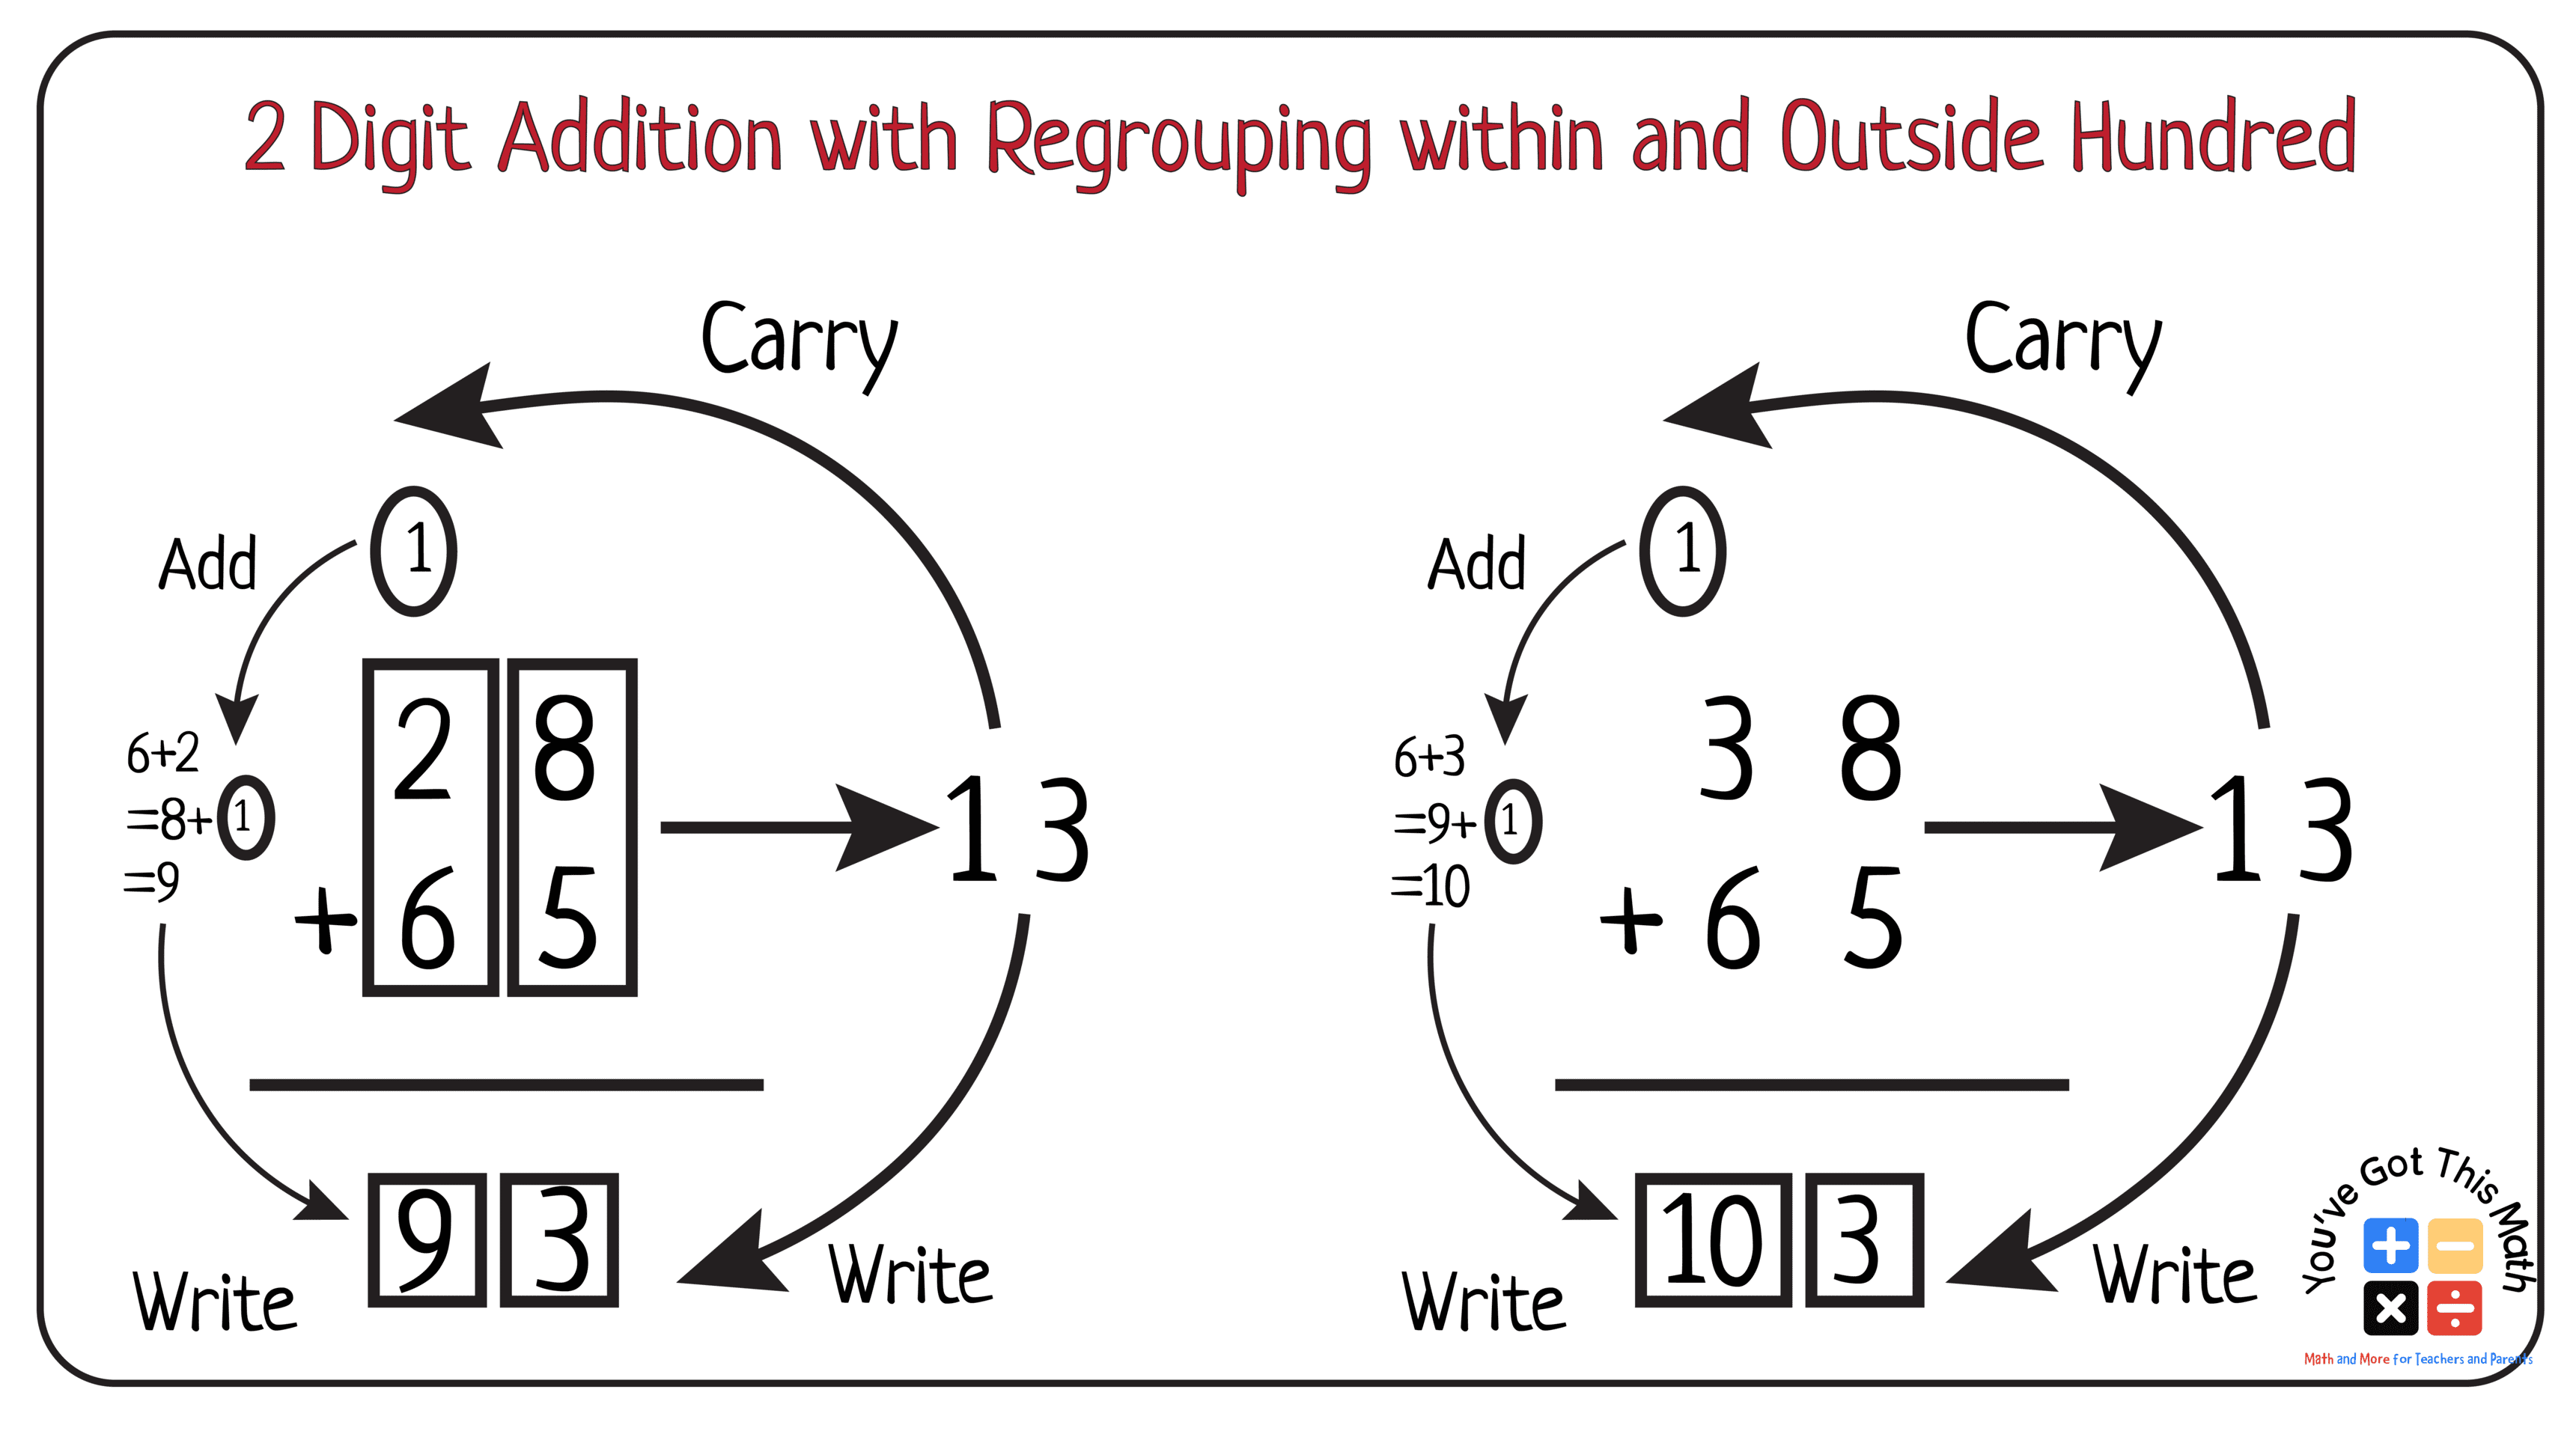 2 Digit Addition with Regrouping within and Outside Hundred